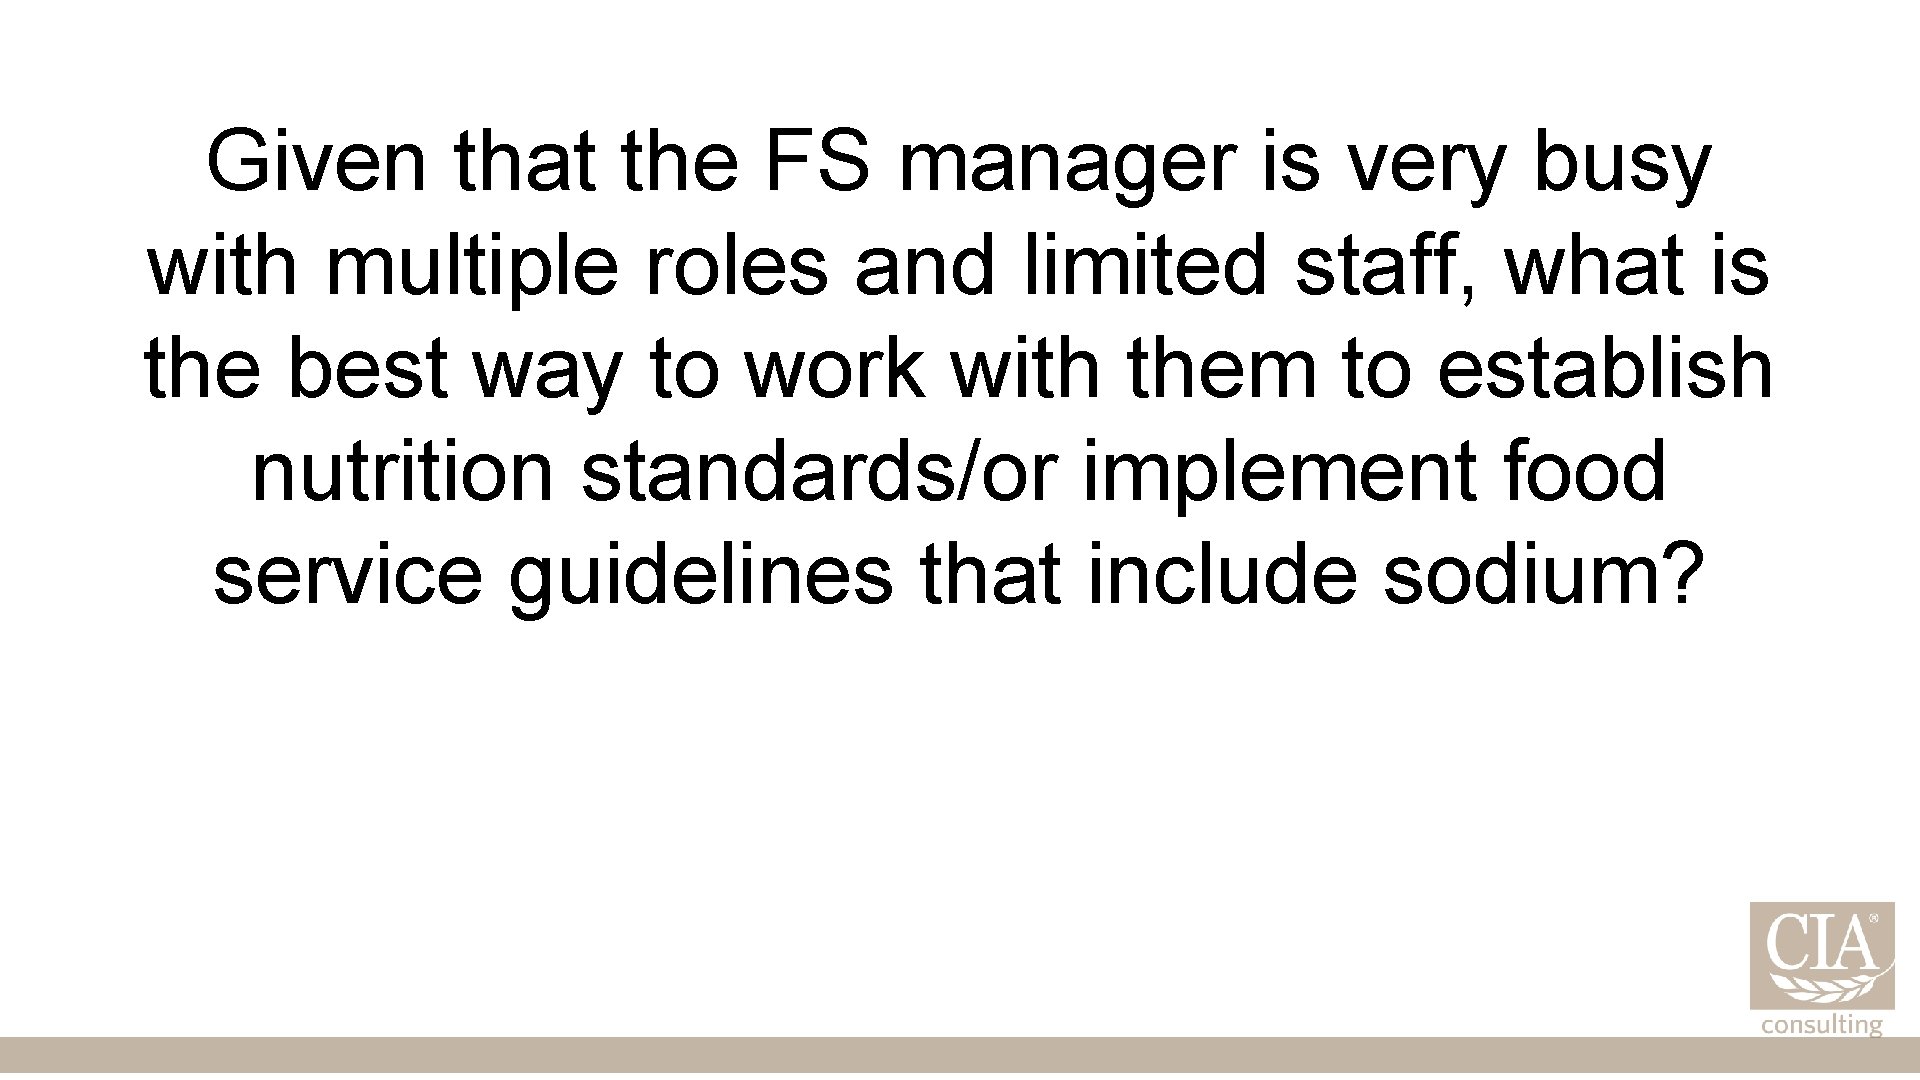 Given that the FS manager is very busy with multiple roles and limited staff,